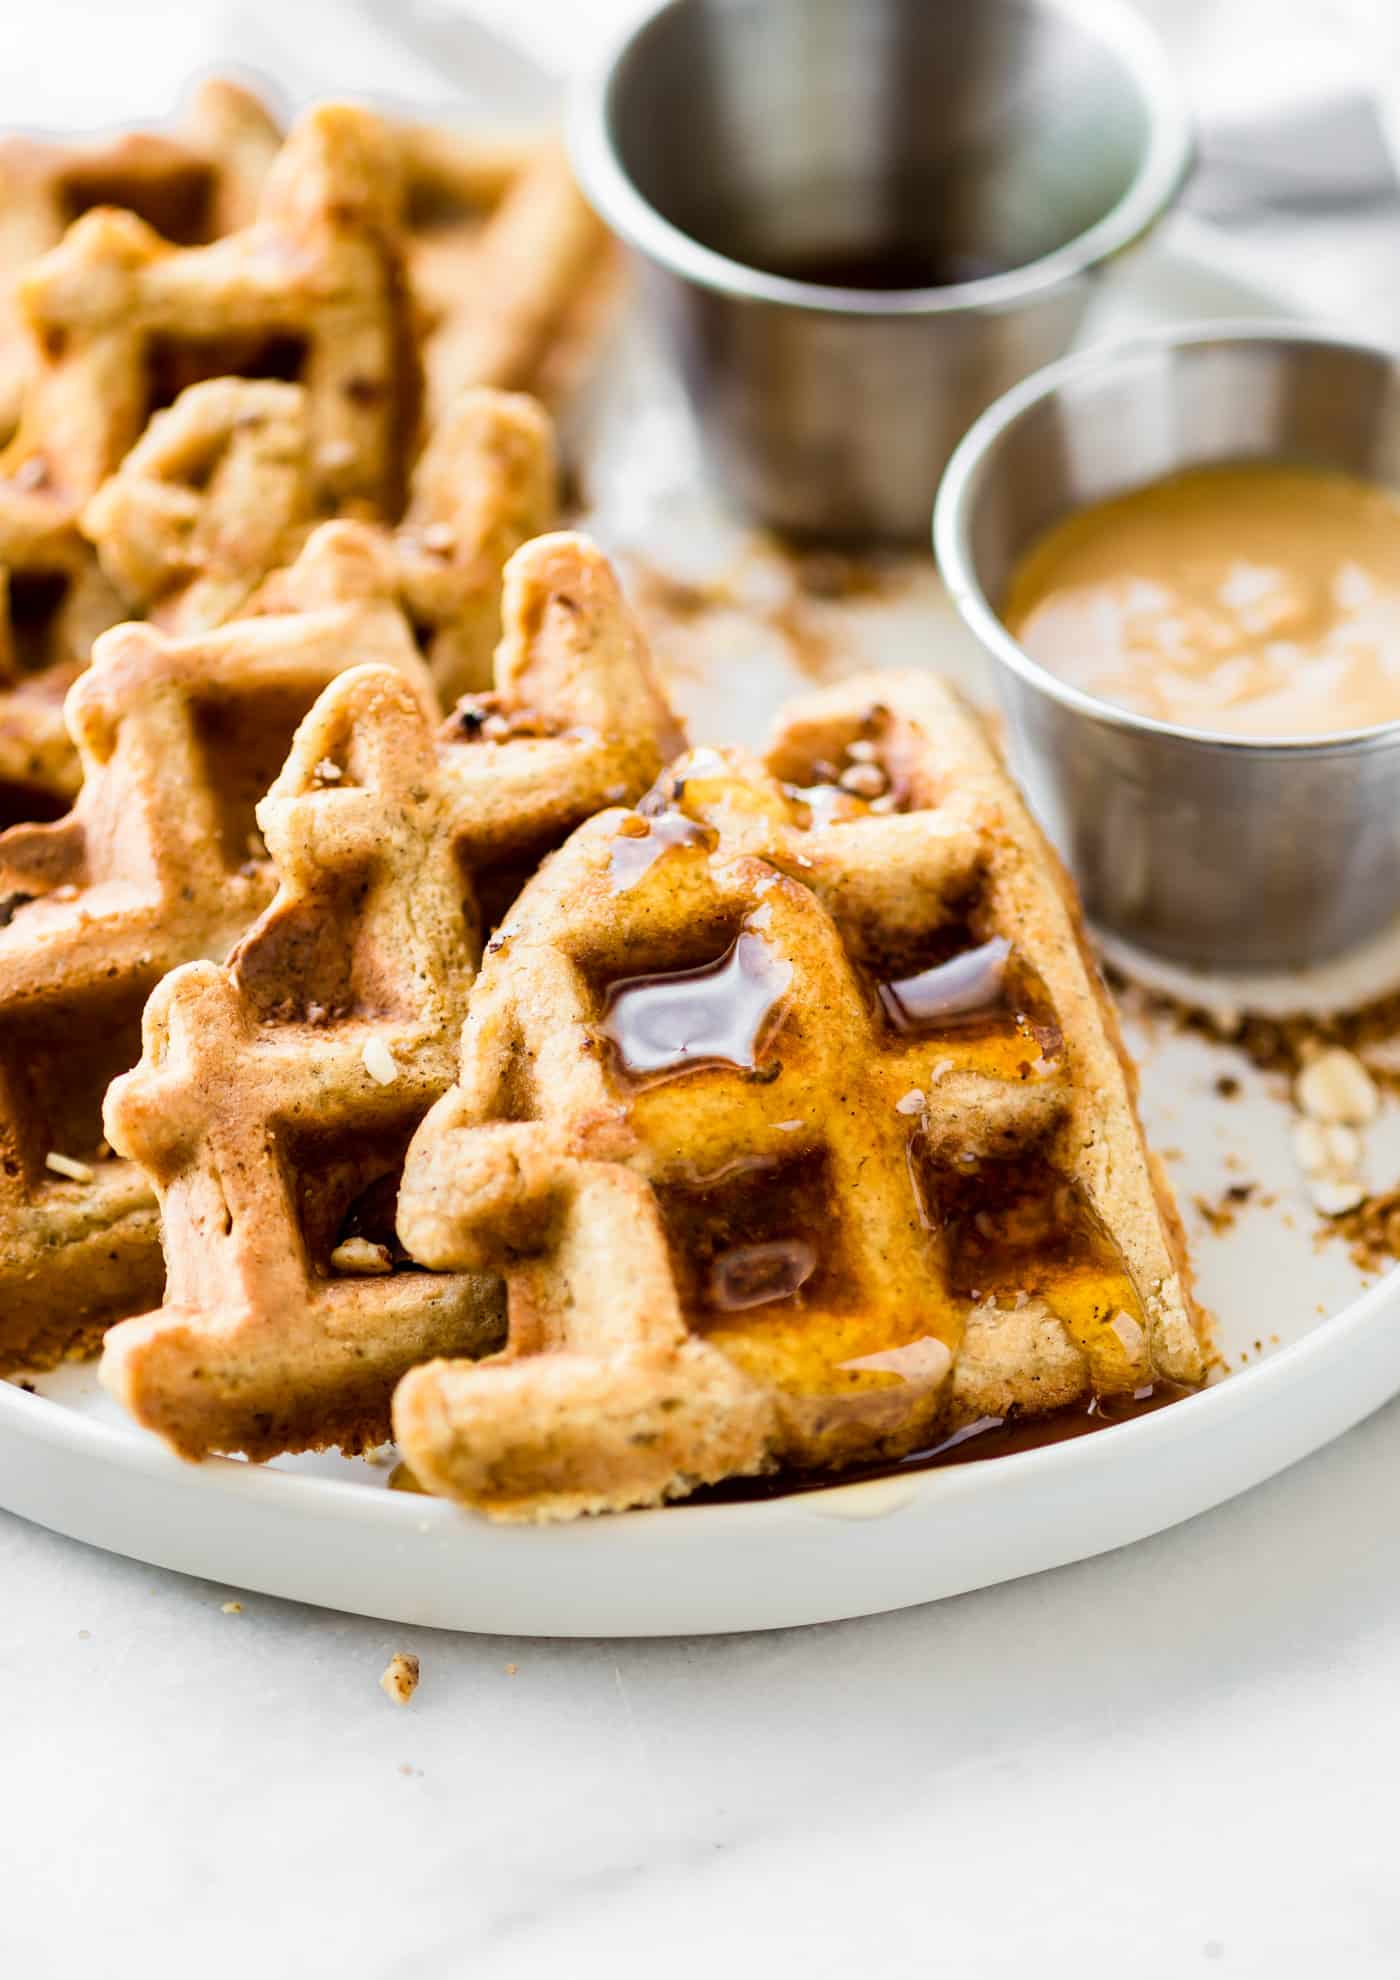 Wedges of peanut butter waffles on a plate drizzled with maple syrup.